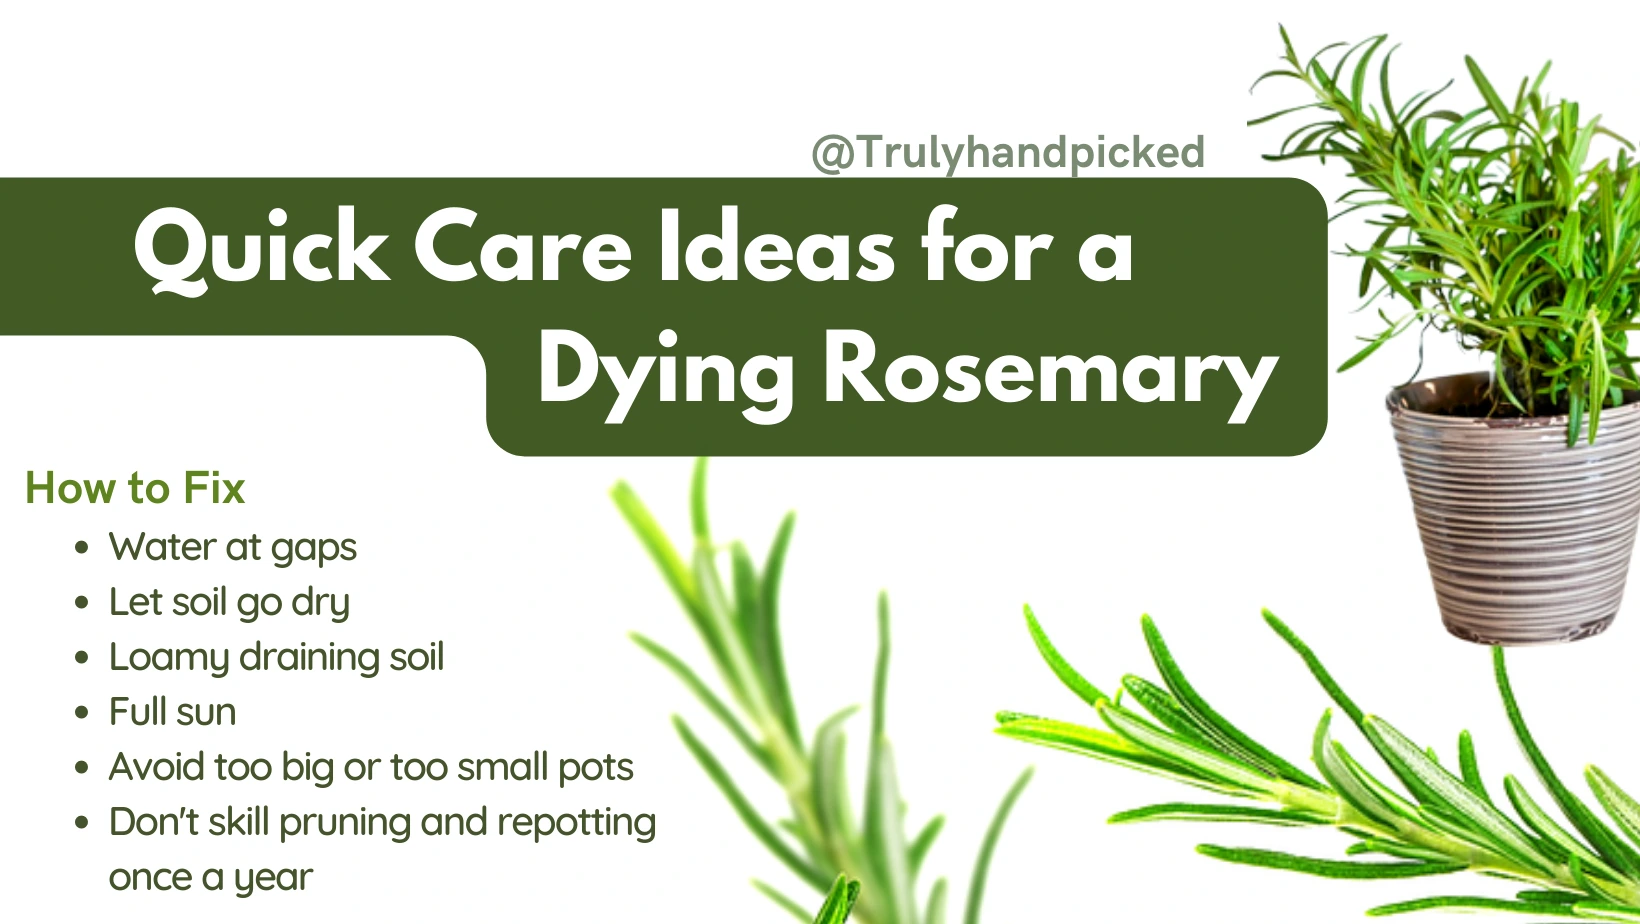 Revive: How to Care for a Dying Rosemary